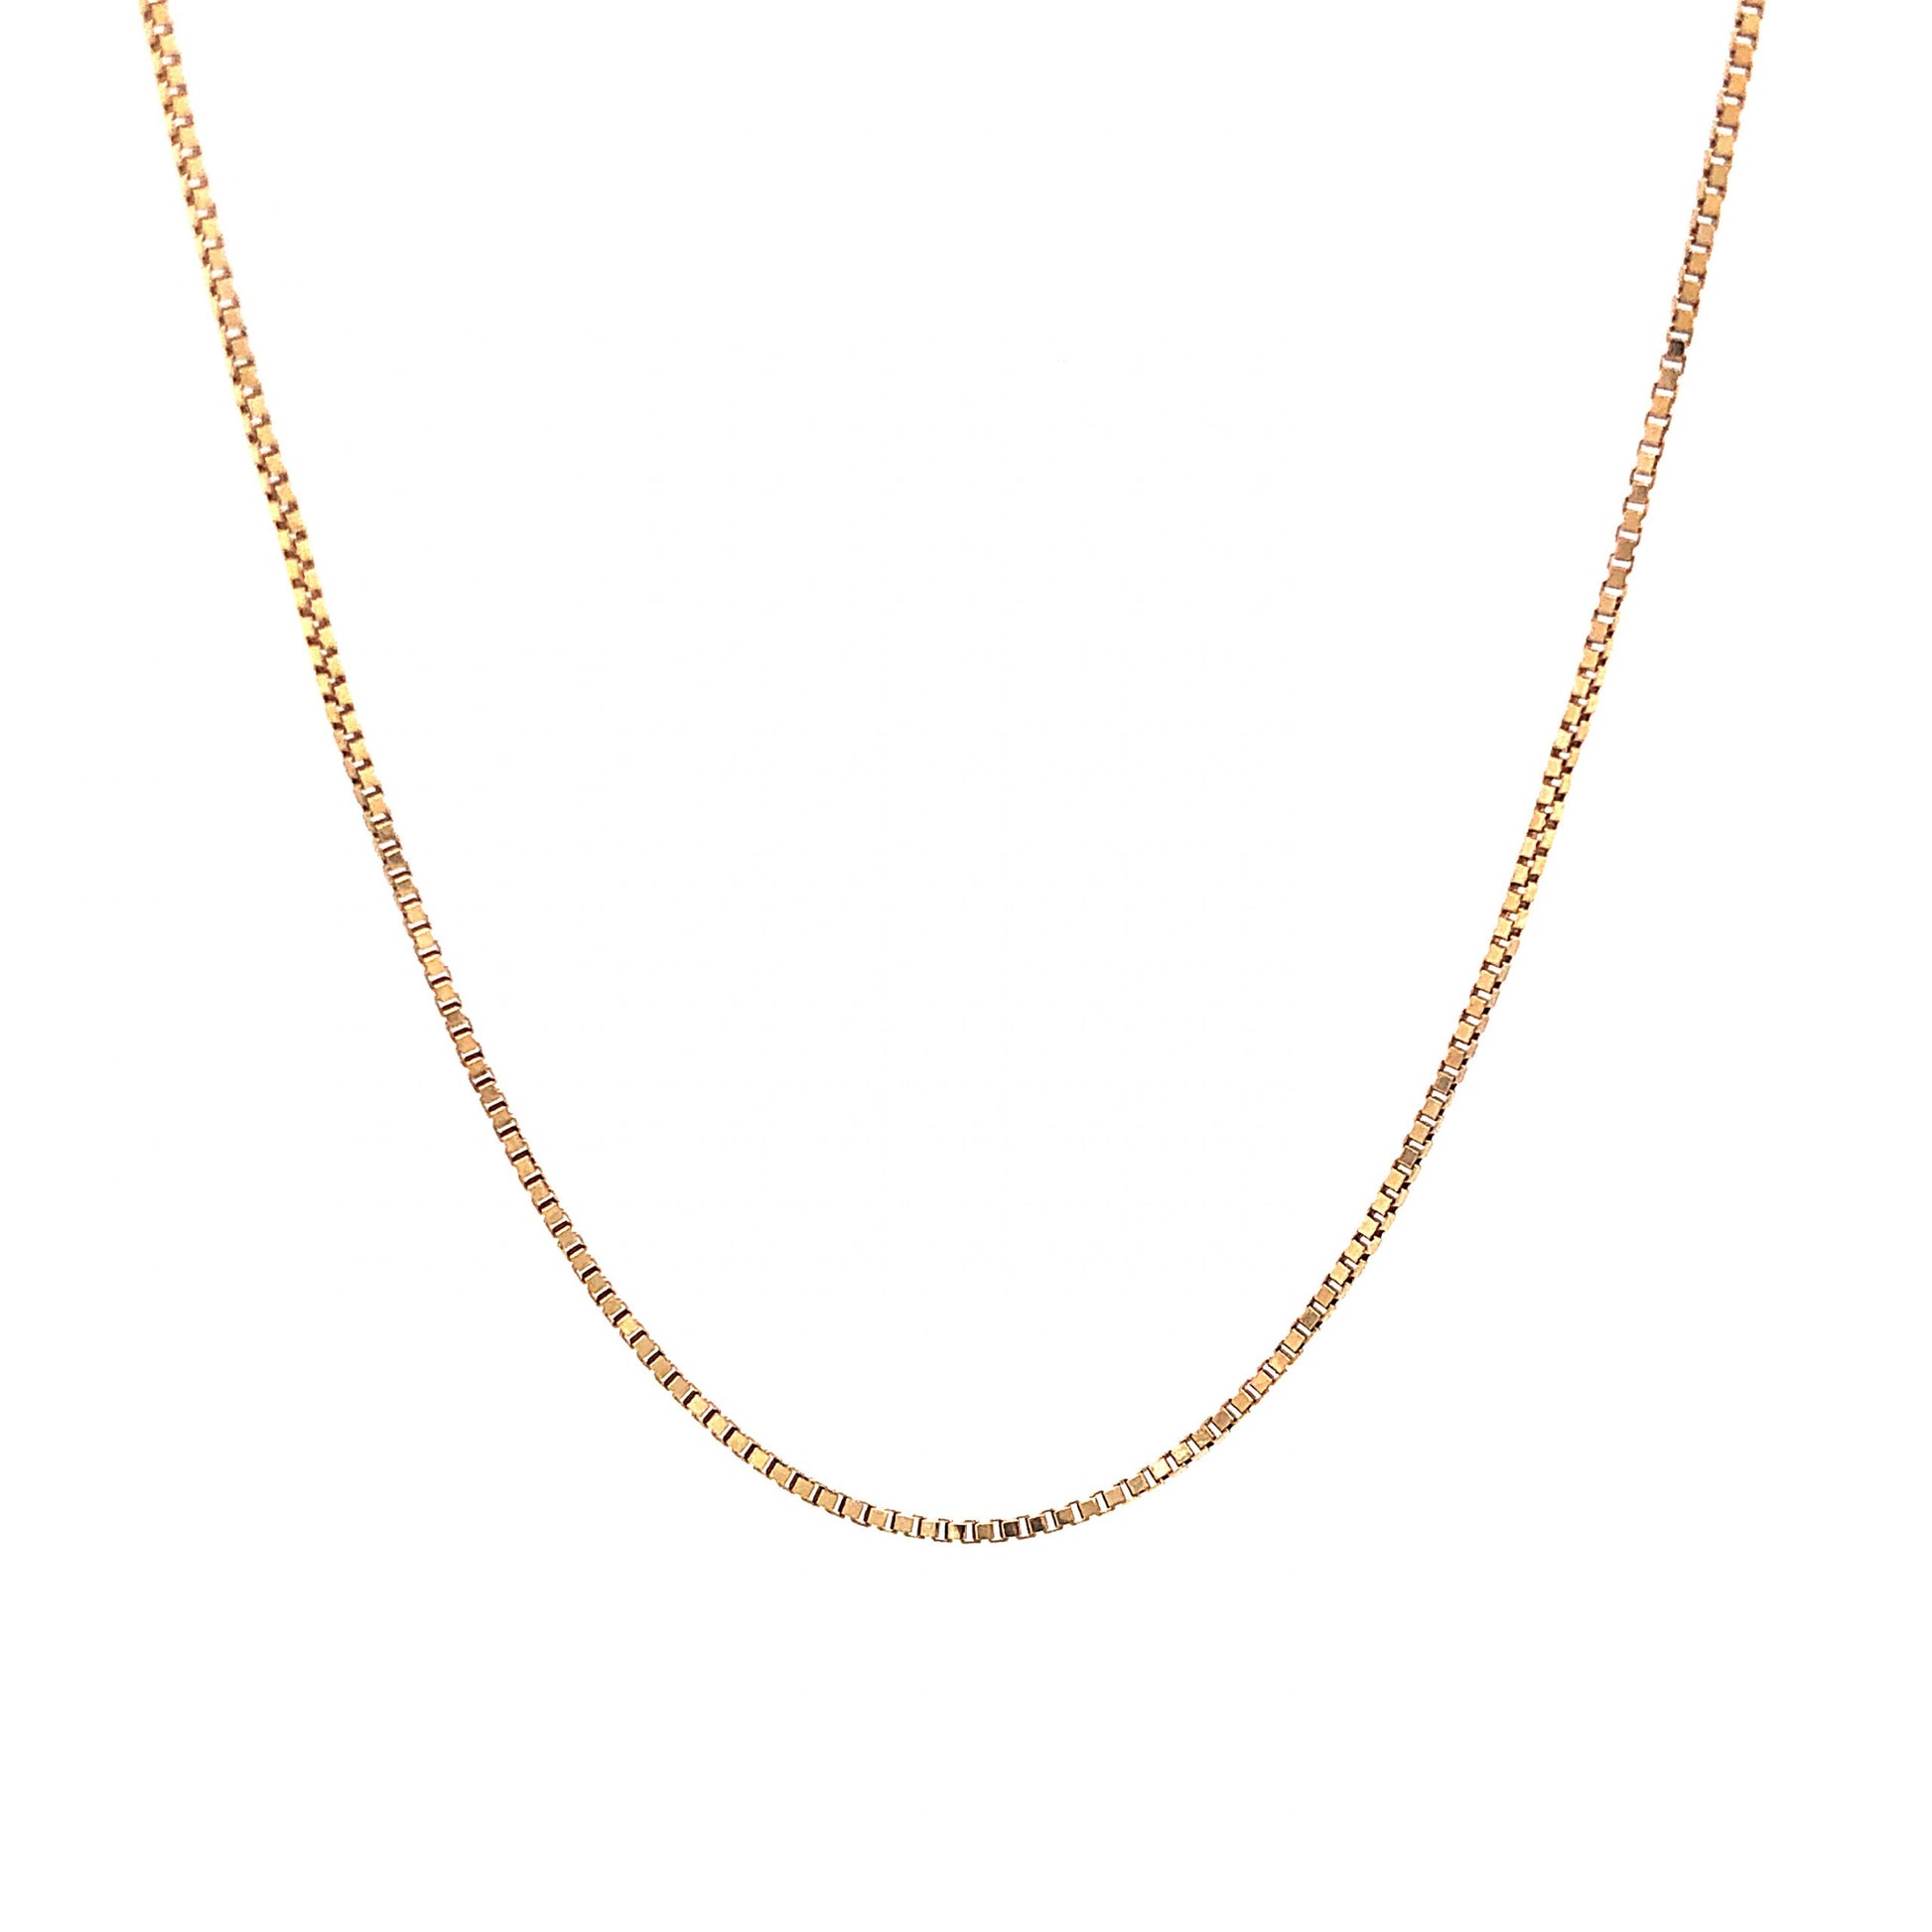 19 Inch Pendant Chain in 14k Yellow GoldComposition: 14 Karat Yellow Gold Total Gram Weight: 2.5 g Inscription: 14K ITALY
      